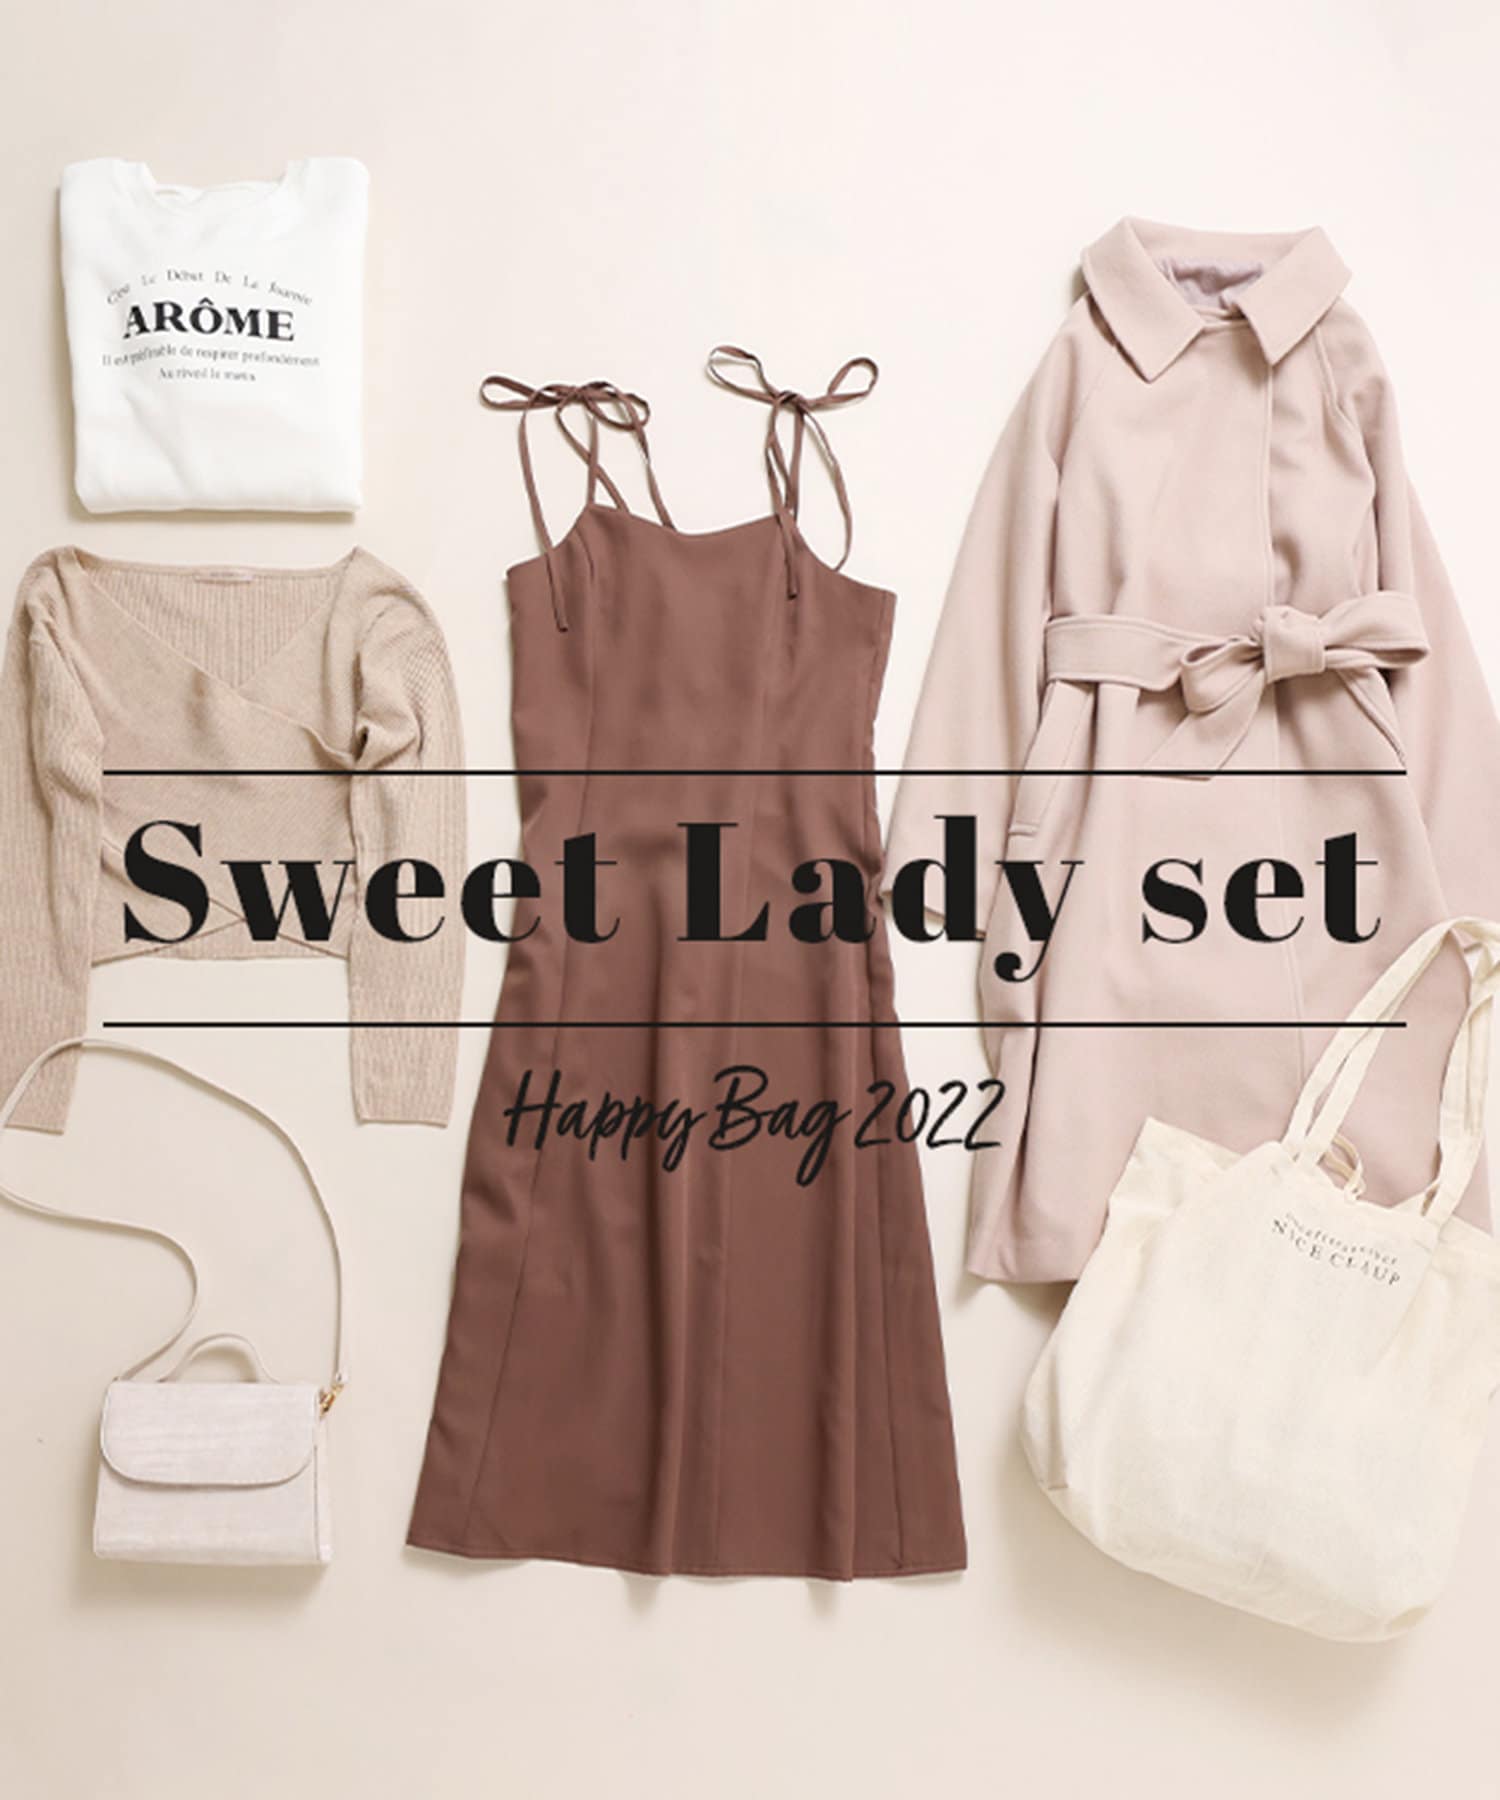 Happy bag】Sweet Lady Set | one after another NICE CLAUP(ワンアフターアナザー  ナイスクラップ)レディース | PAL CLOSET(パルクローゼット) - パルグループ公式ファッション通販サイト